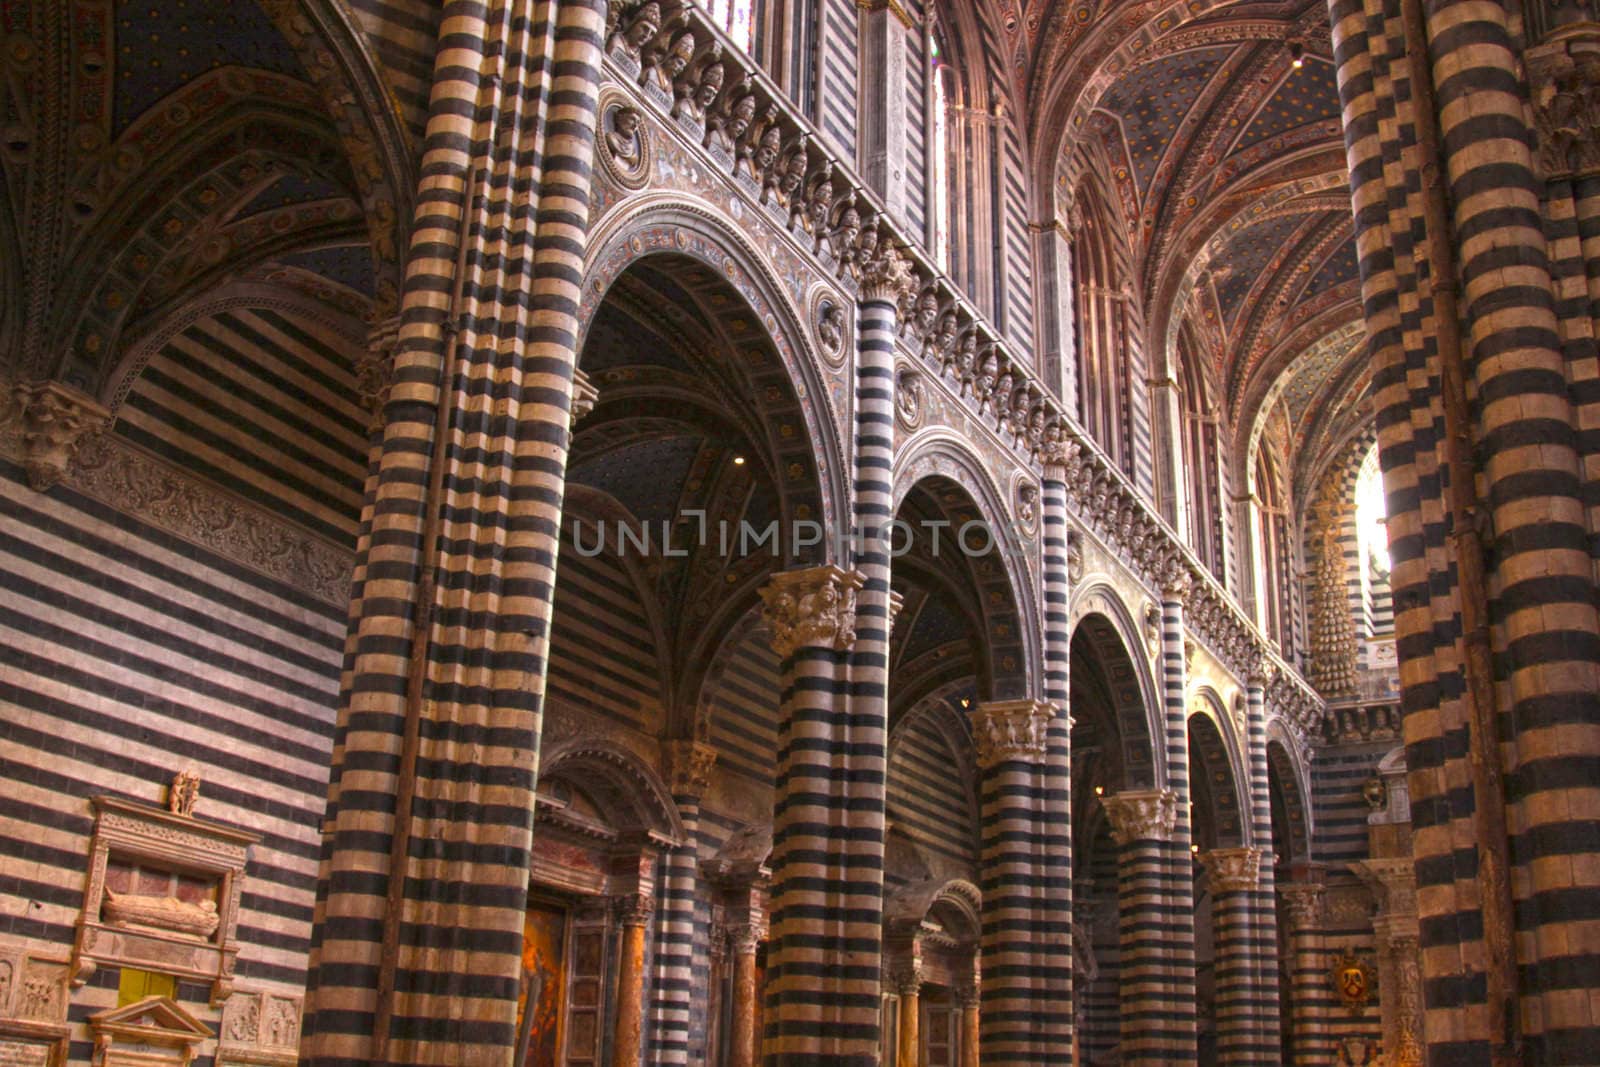 Siena Cathedral Interior
 by ca2hill